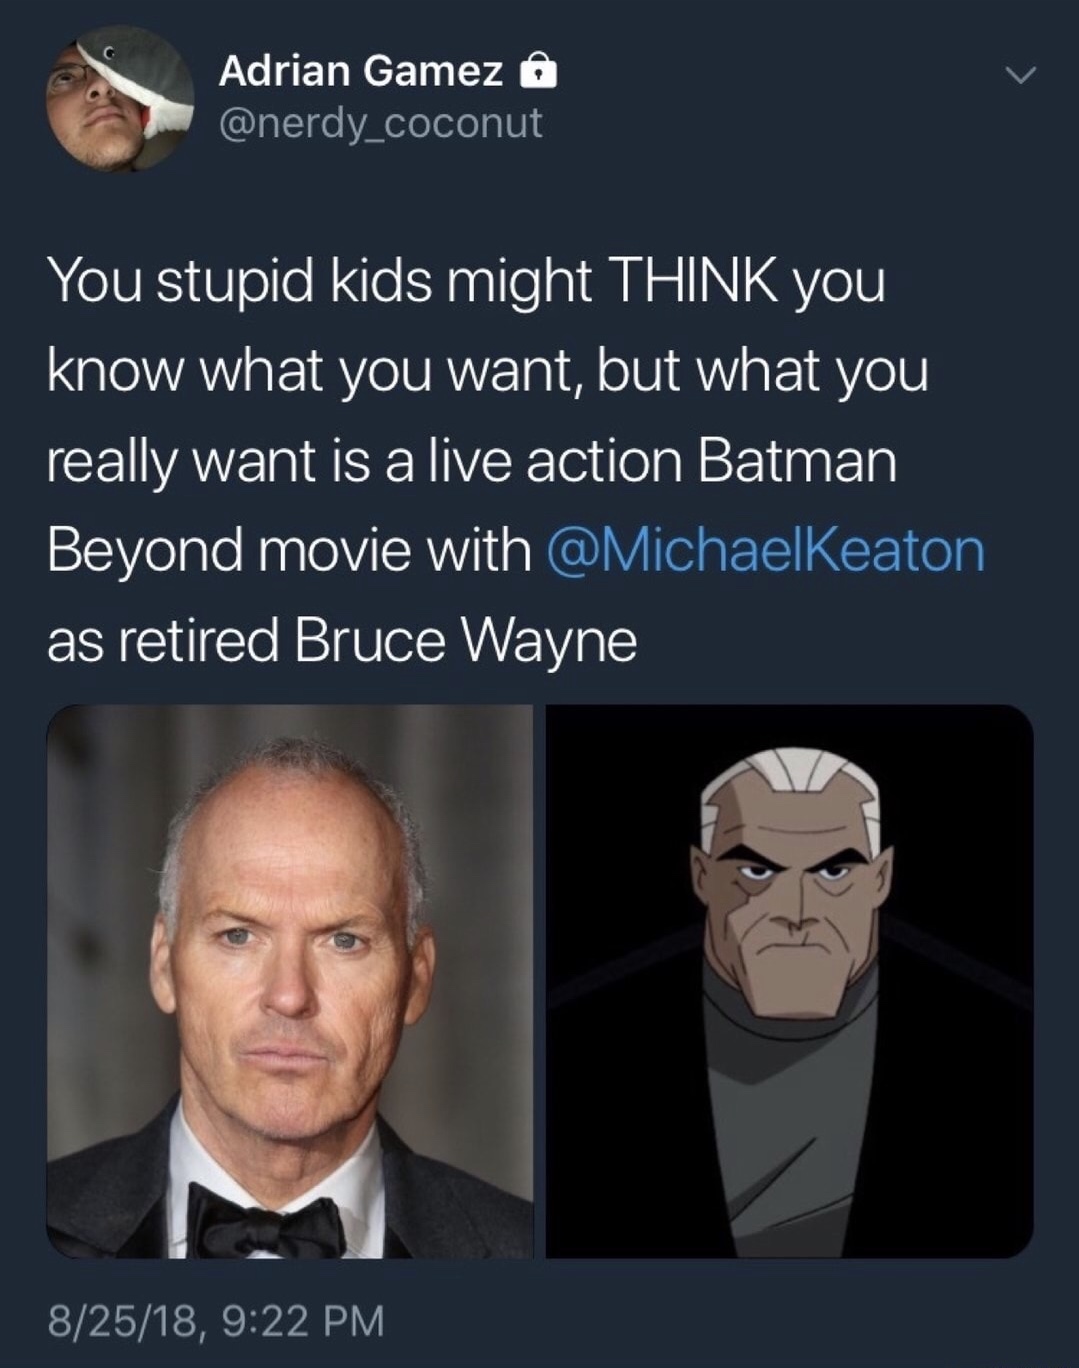 michael keaton batman beyond - Adrian Gamez o You stupid kids might Think you know what you want, but what you really want is a live action Batman Beyond movie with as retired Bruce Wayne 82518,